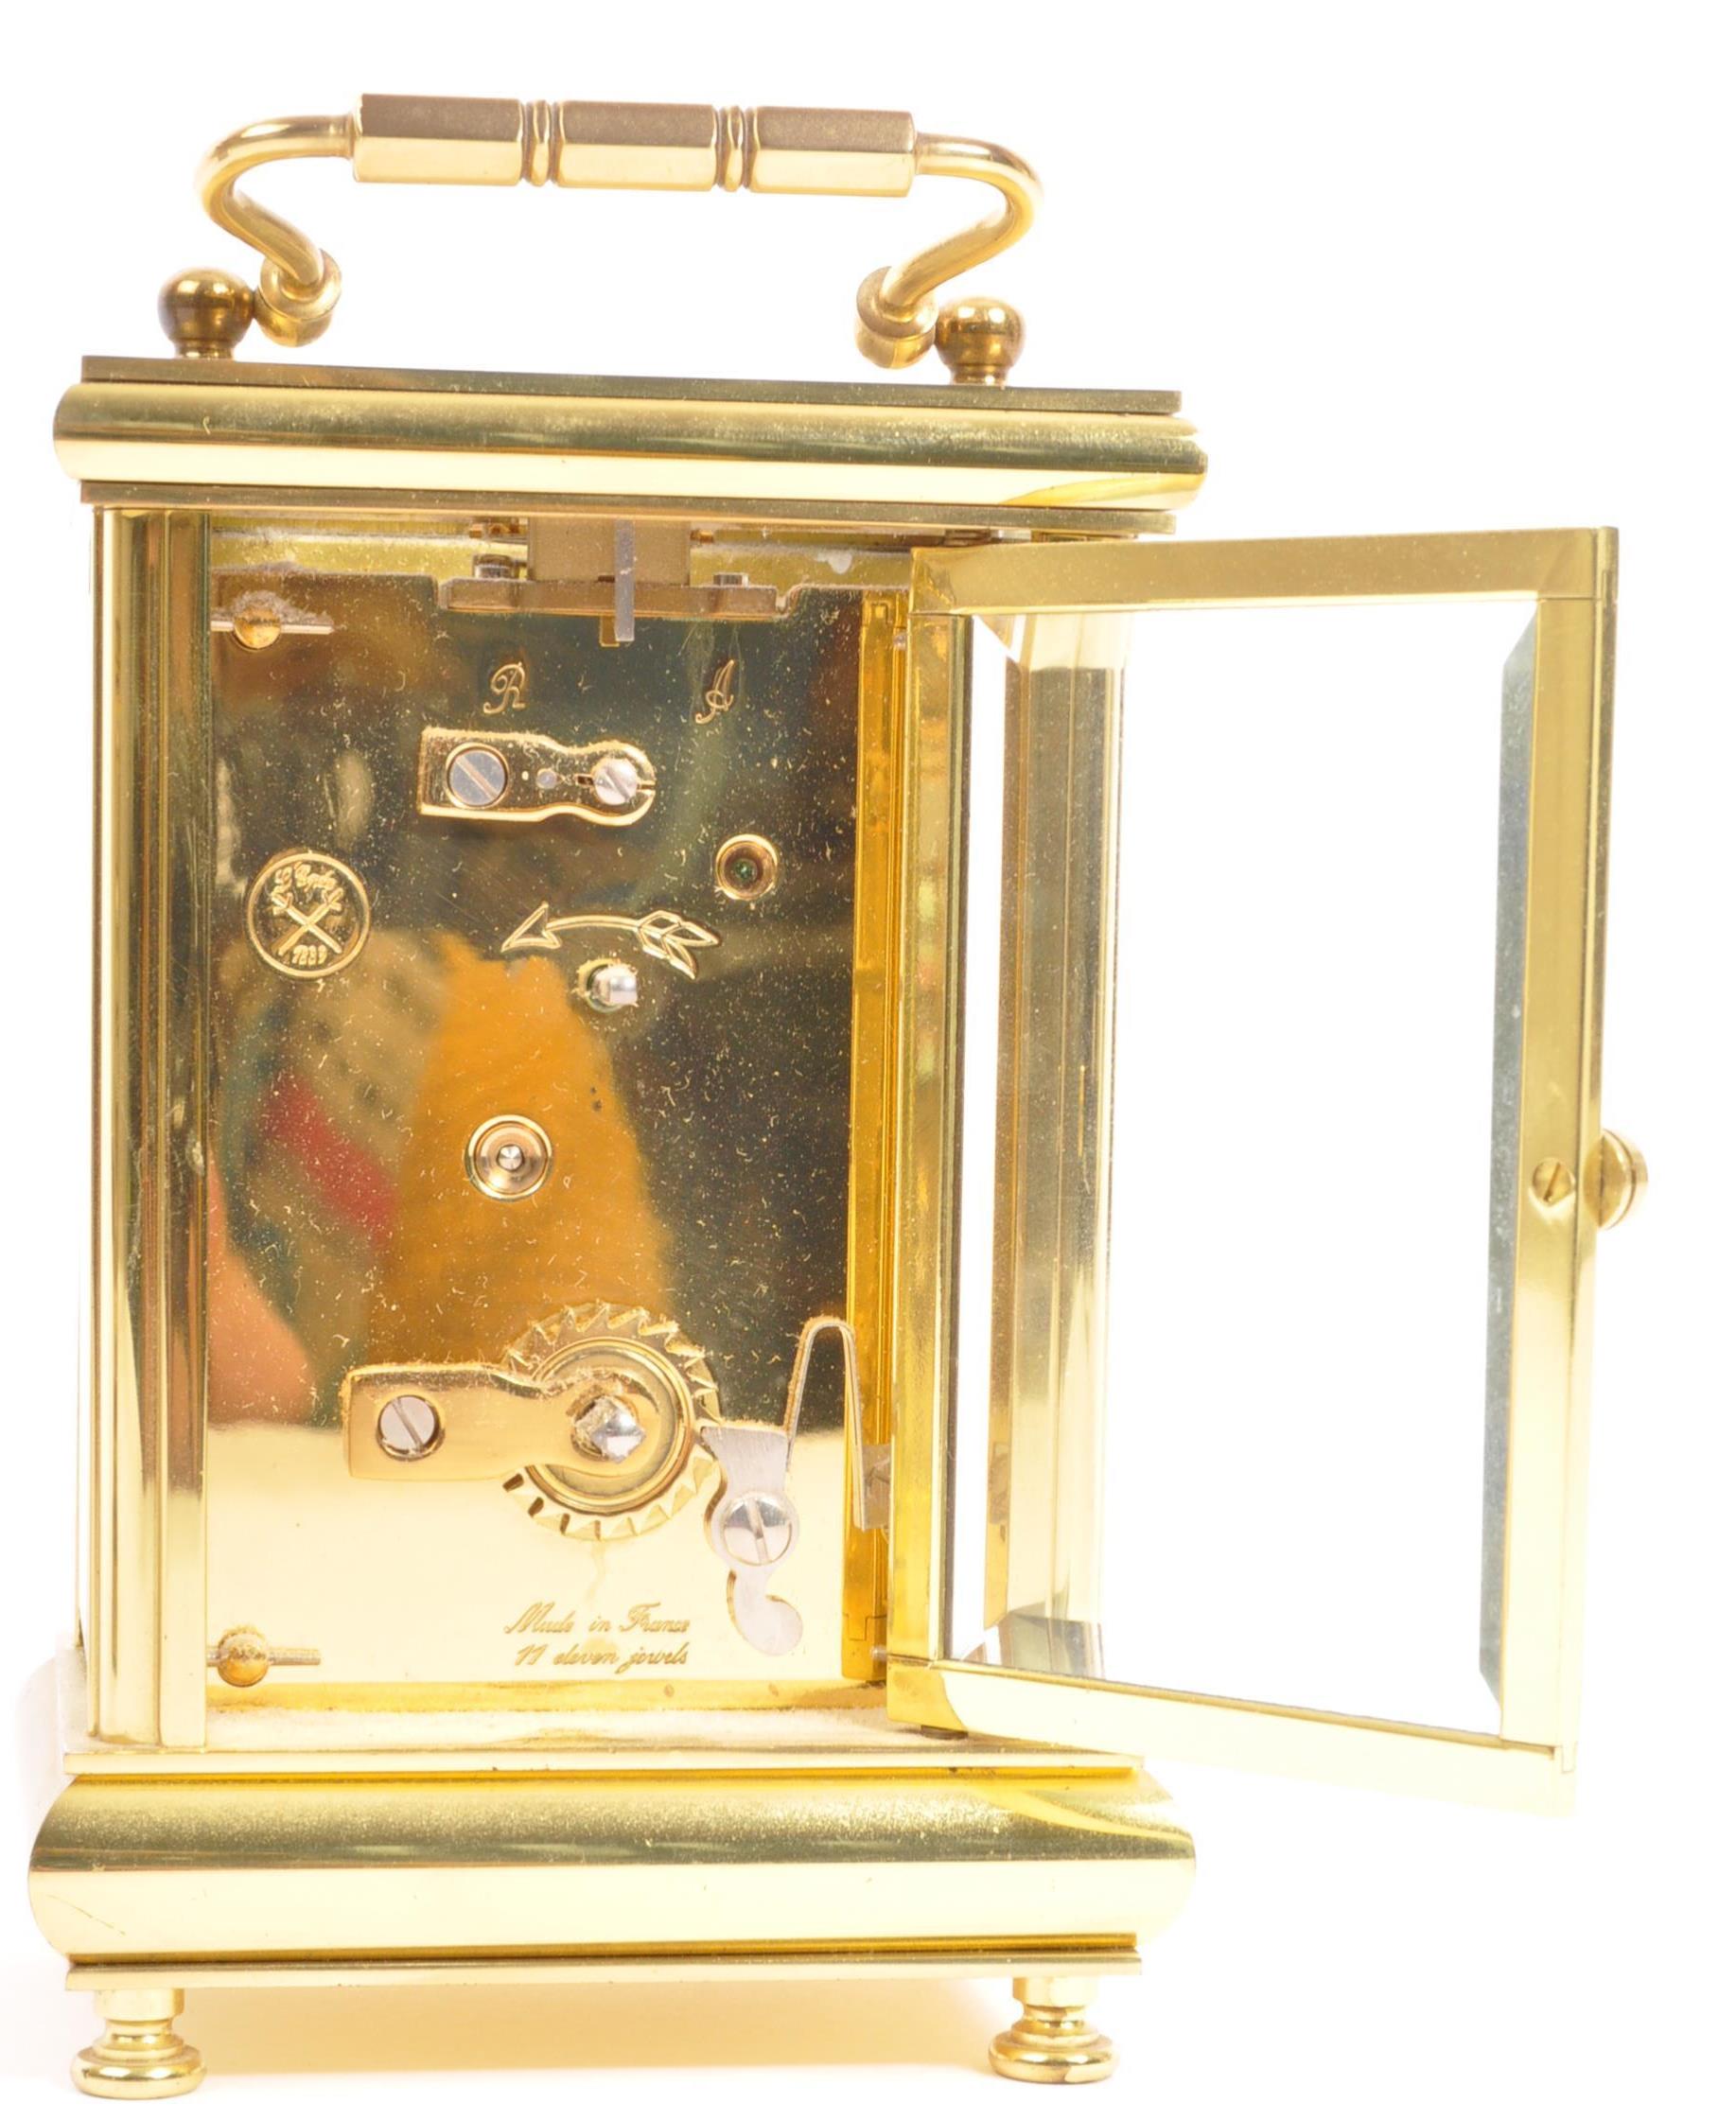 TWO EARLY 20TH CENTURY BRASS CARRIAGE CLOCK - Image 4 of 7